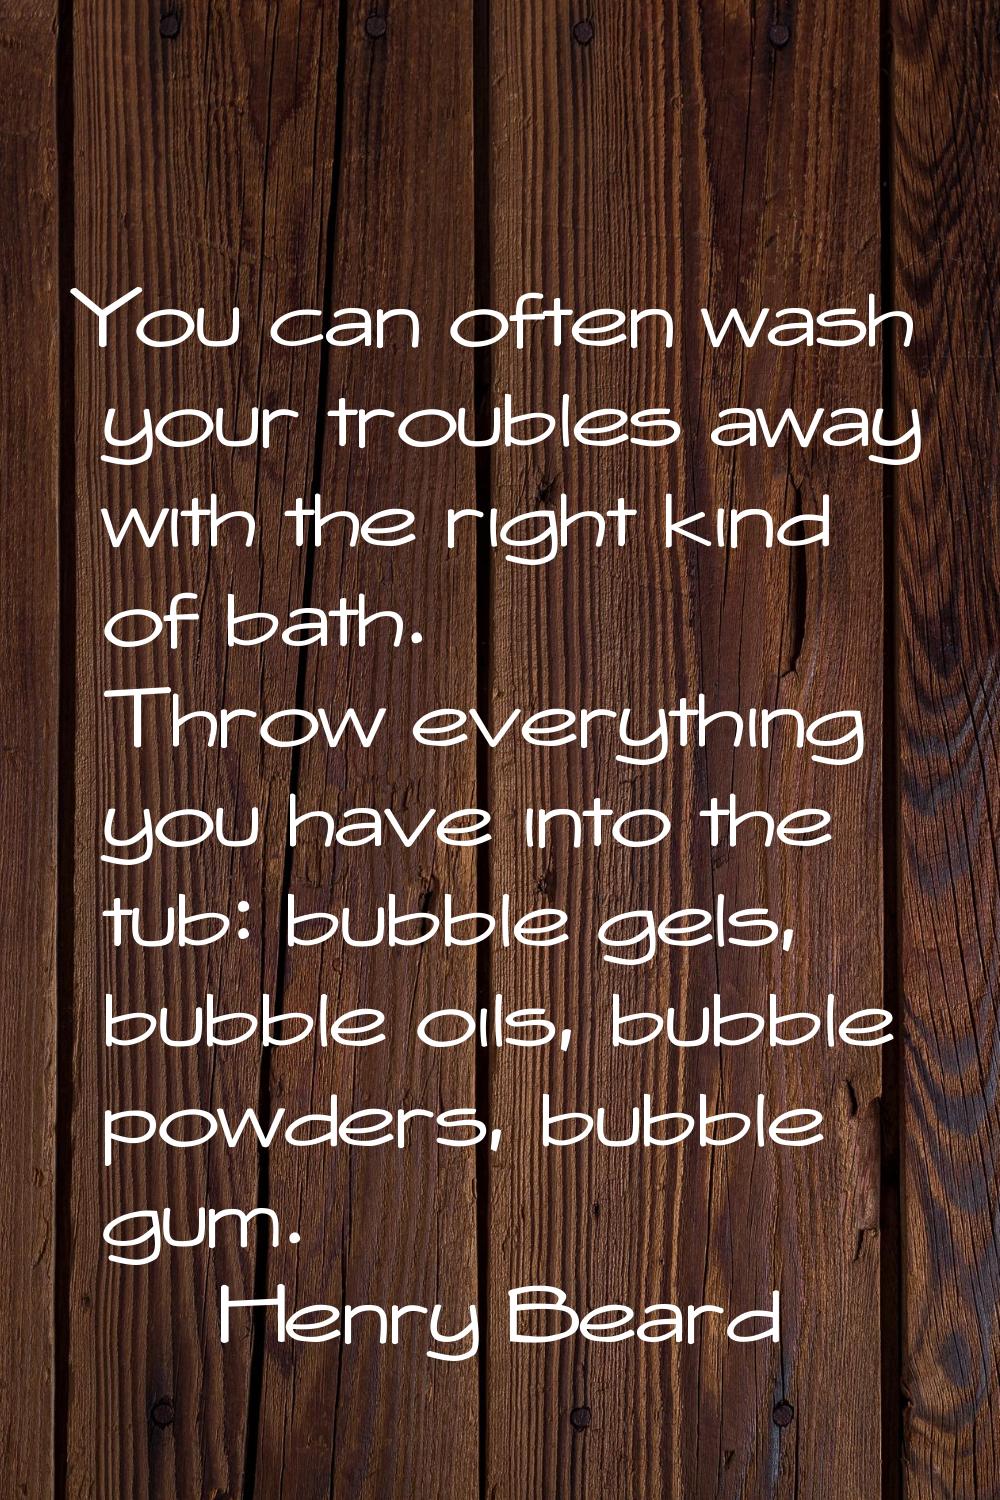 You can often wash your troubles away with the right kind of bath. Throw everything you have into t